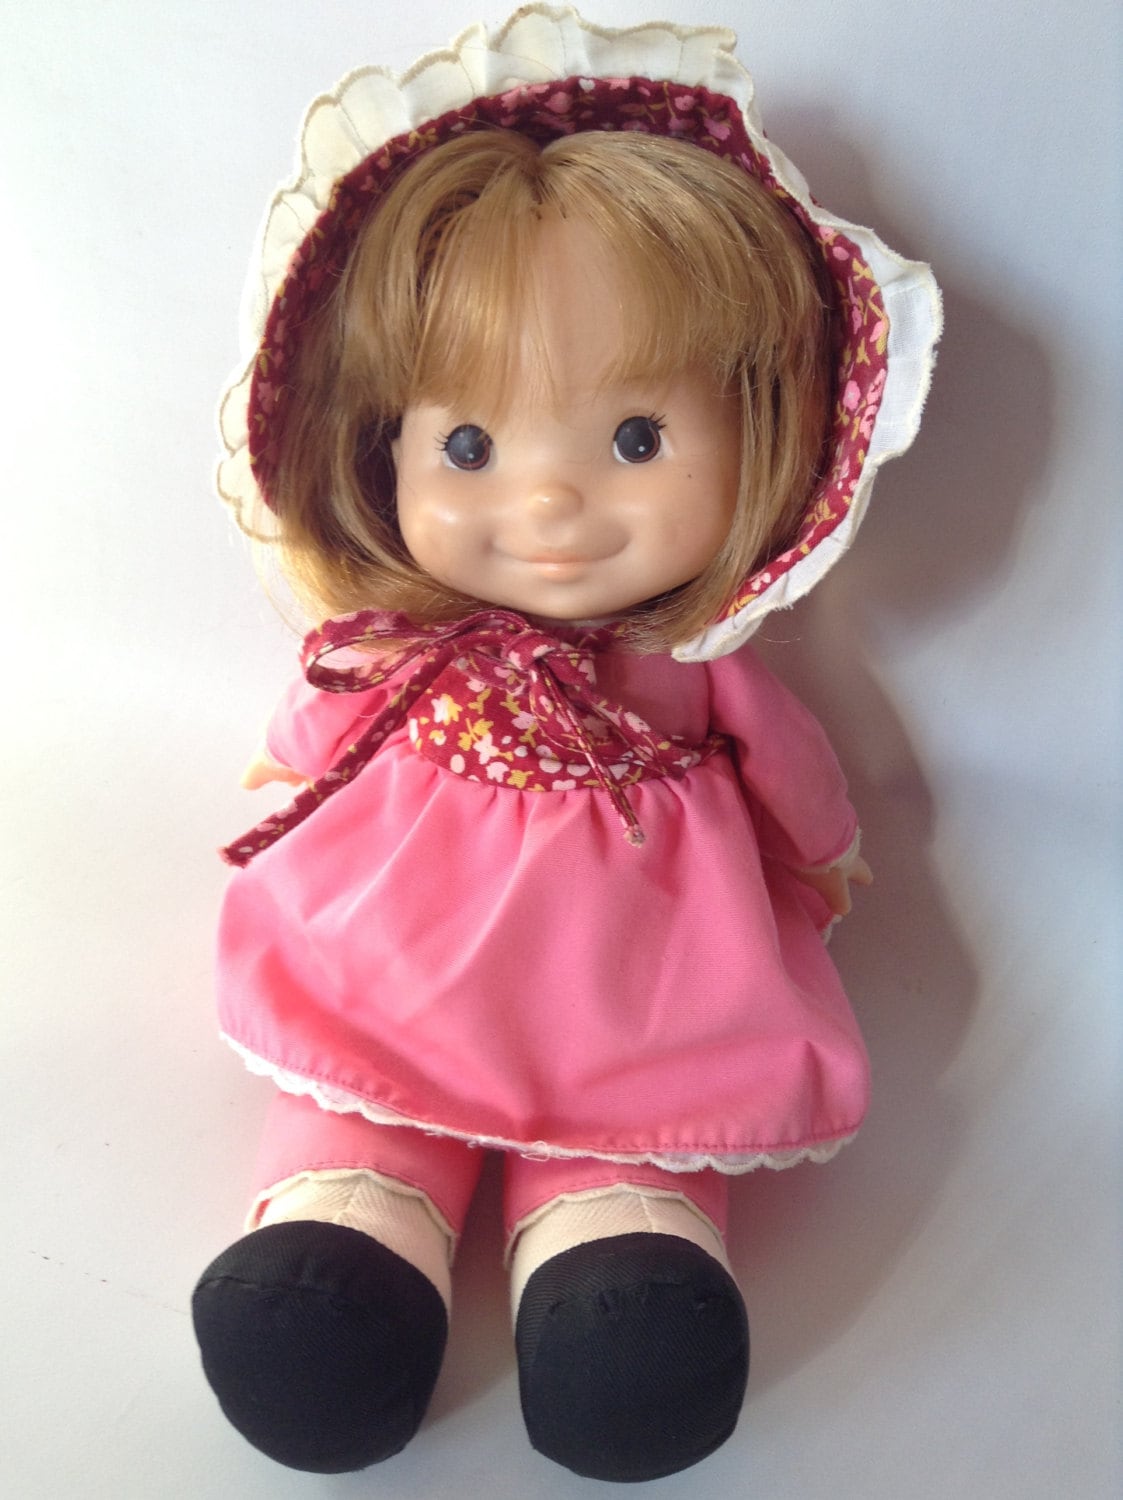 Fisher Price Natalie Doll Vintage 1973 by ThoughtfulVintage